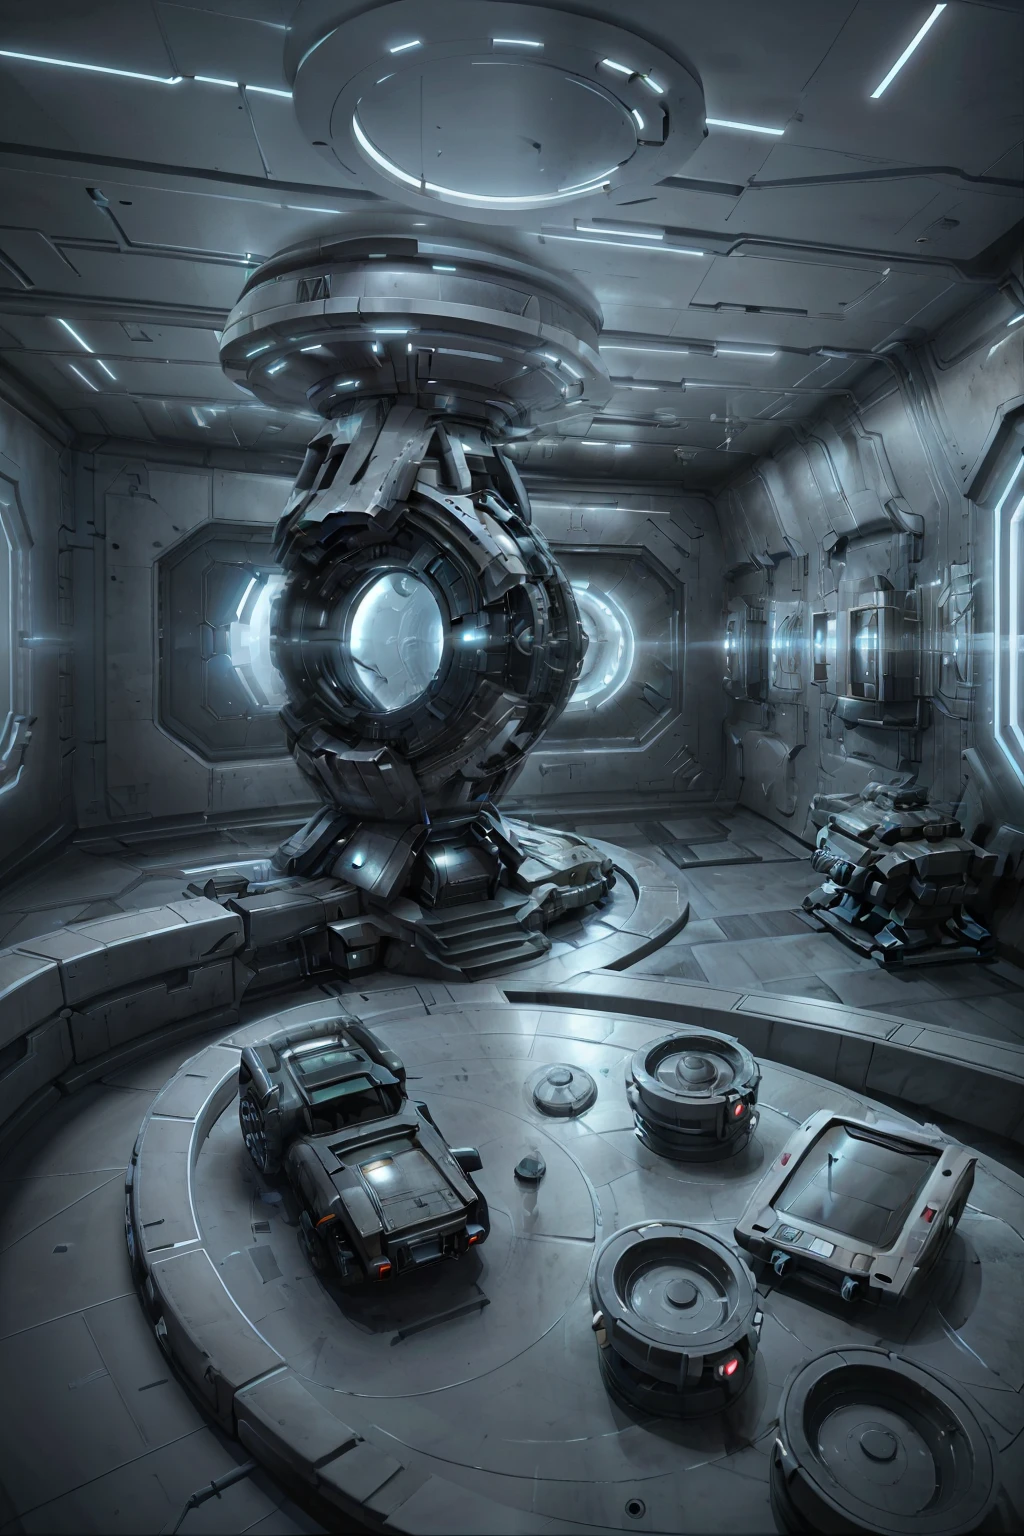 A sci-fi room with all kinds of technological equipment, surreal sci fi set design, sci - fi interior, sci-fi night club, scifi room, Sci-fi style, science fiction digital art, stefan koidl inspired, futuristic hall, Science-fi digital art illustration, scifi style, sci - fi look, science fiction digital painting